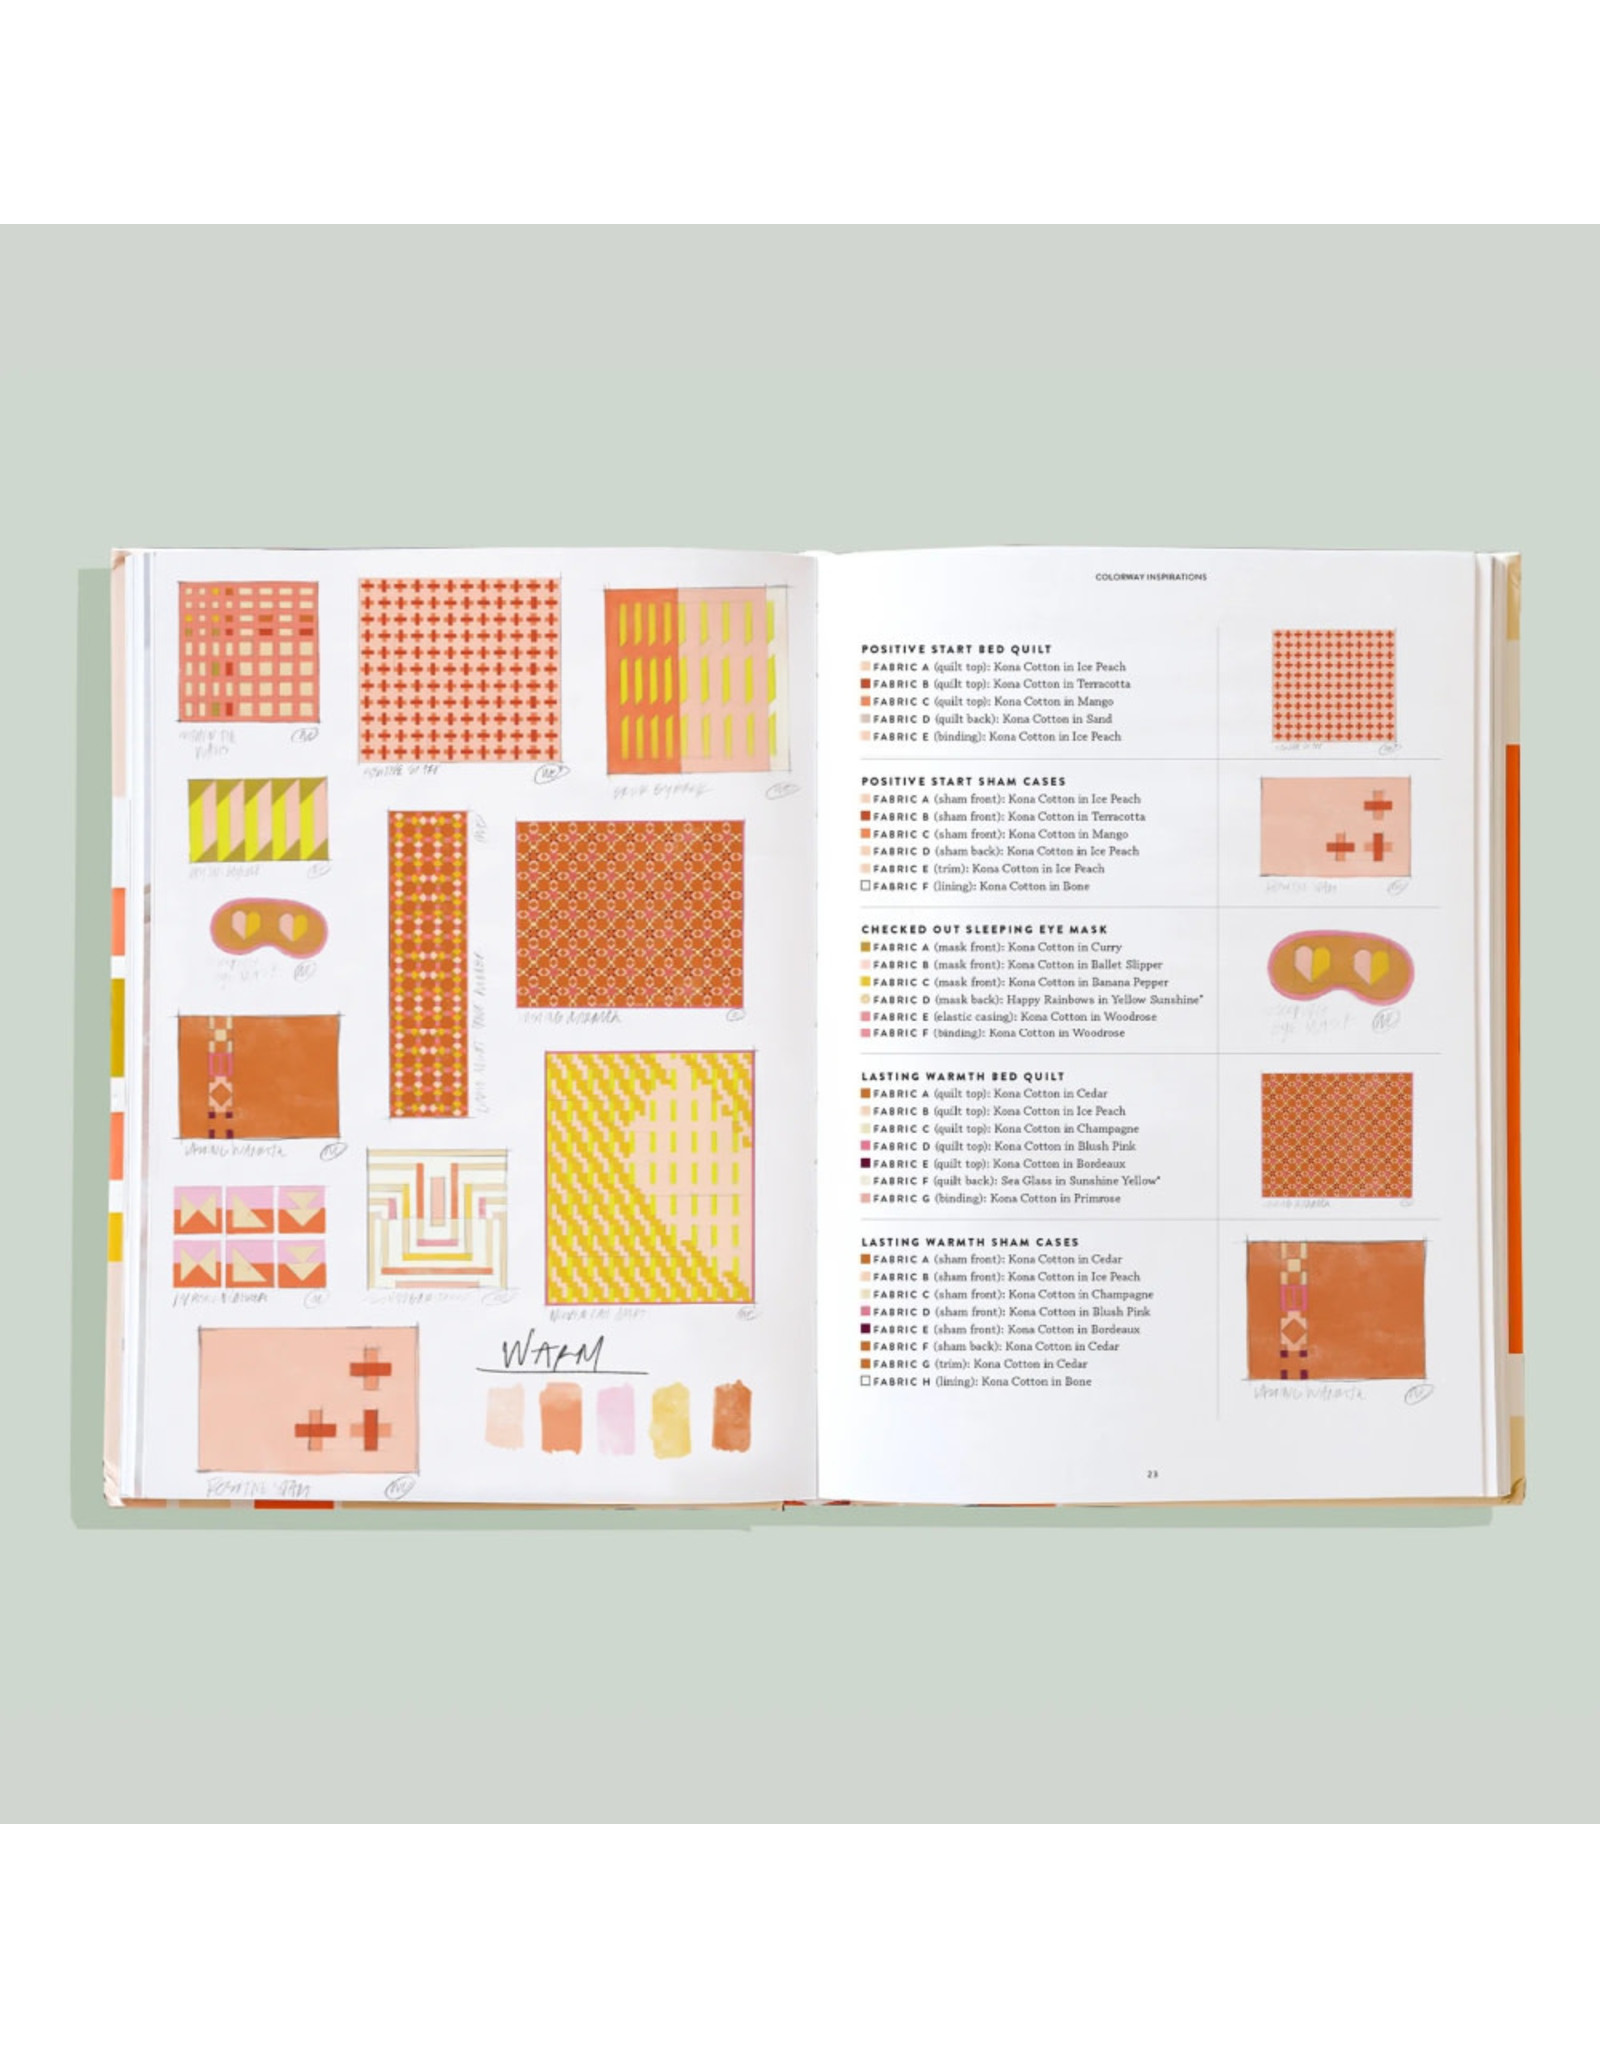 The Quilted Home Handbook by Wendy Chow